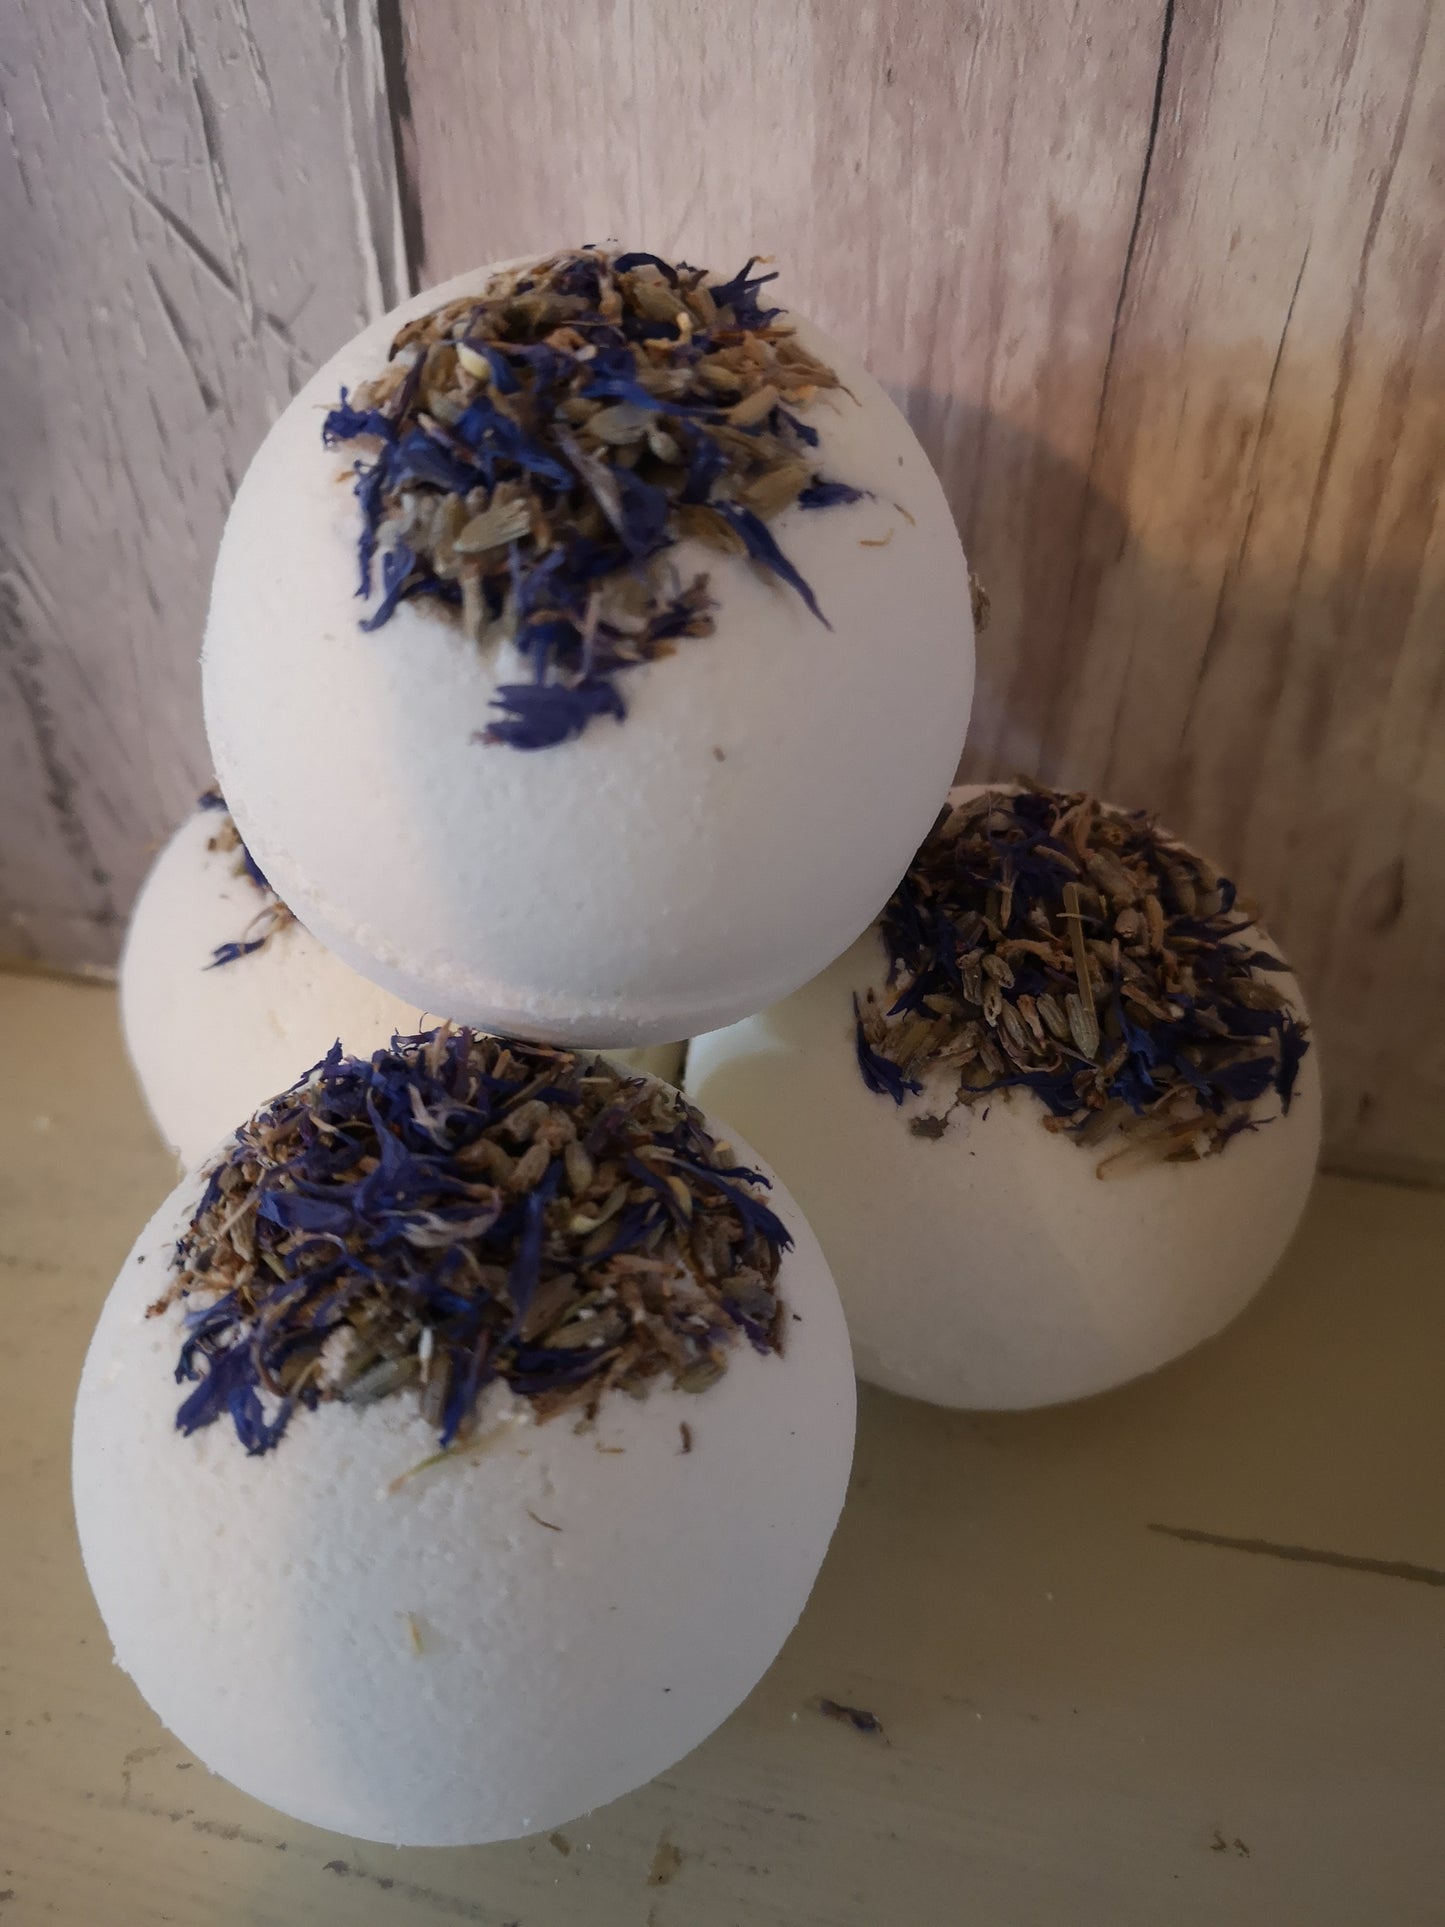 Aromatherapy Bath Bomb "And Relax"